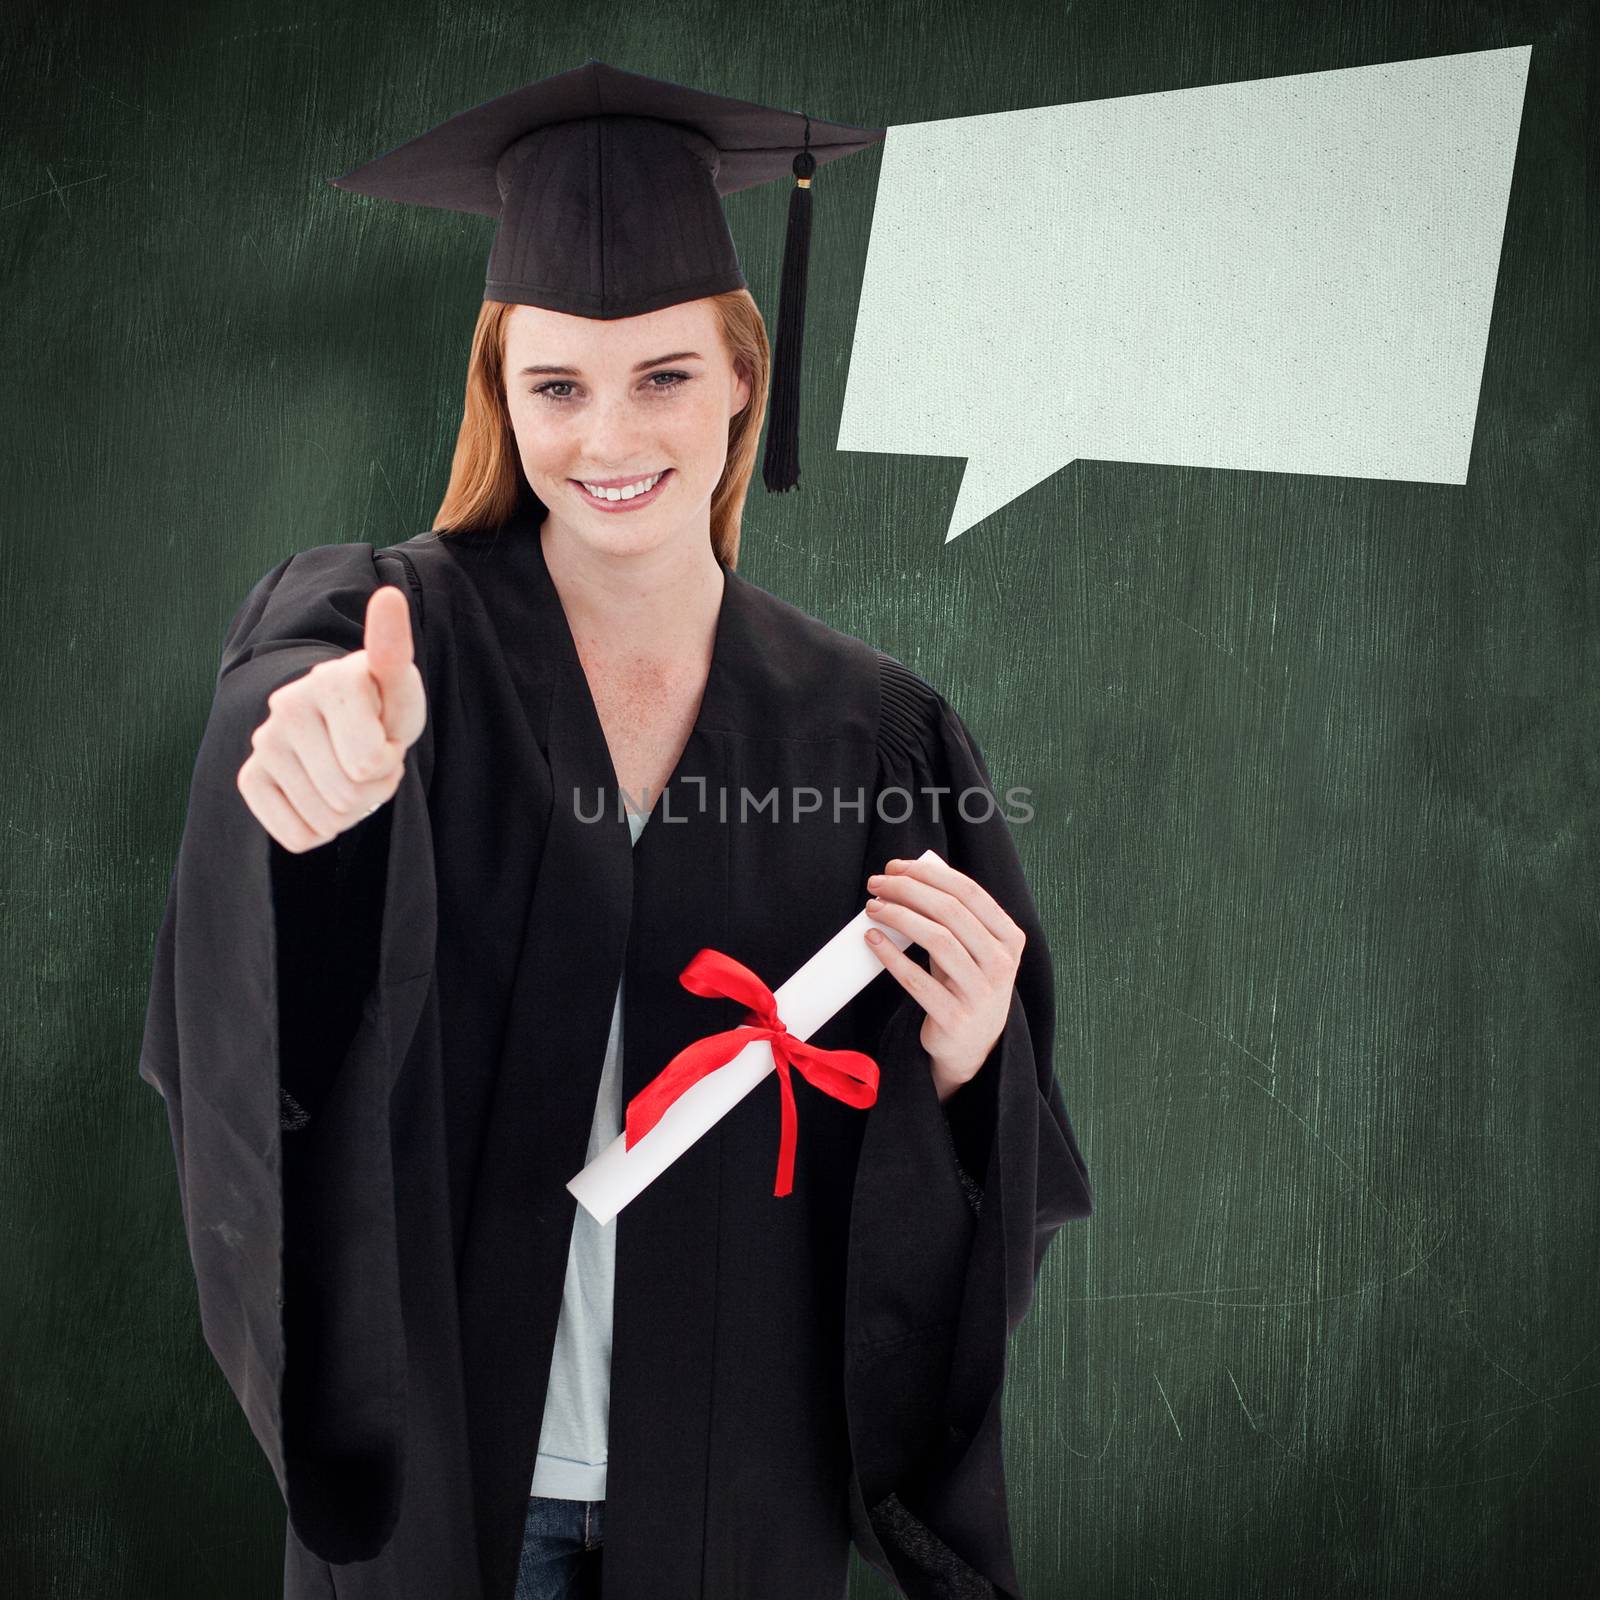 Teenage Girl Celebrating Graduation with thumbs up against green chalkboard